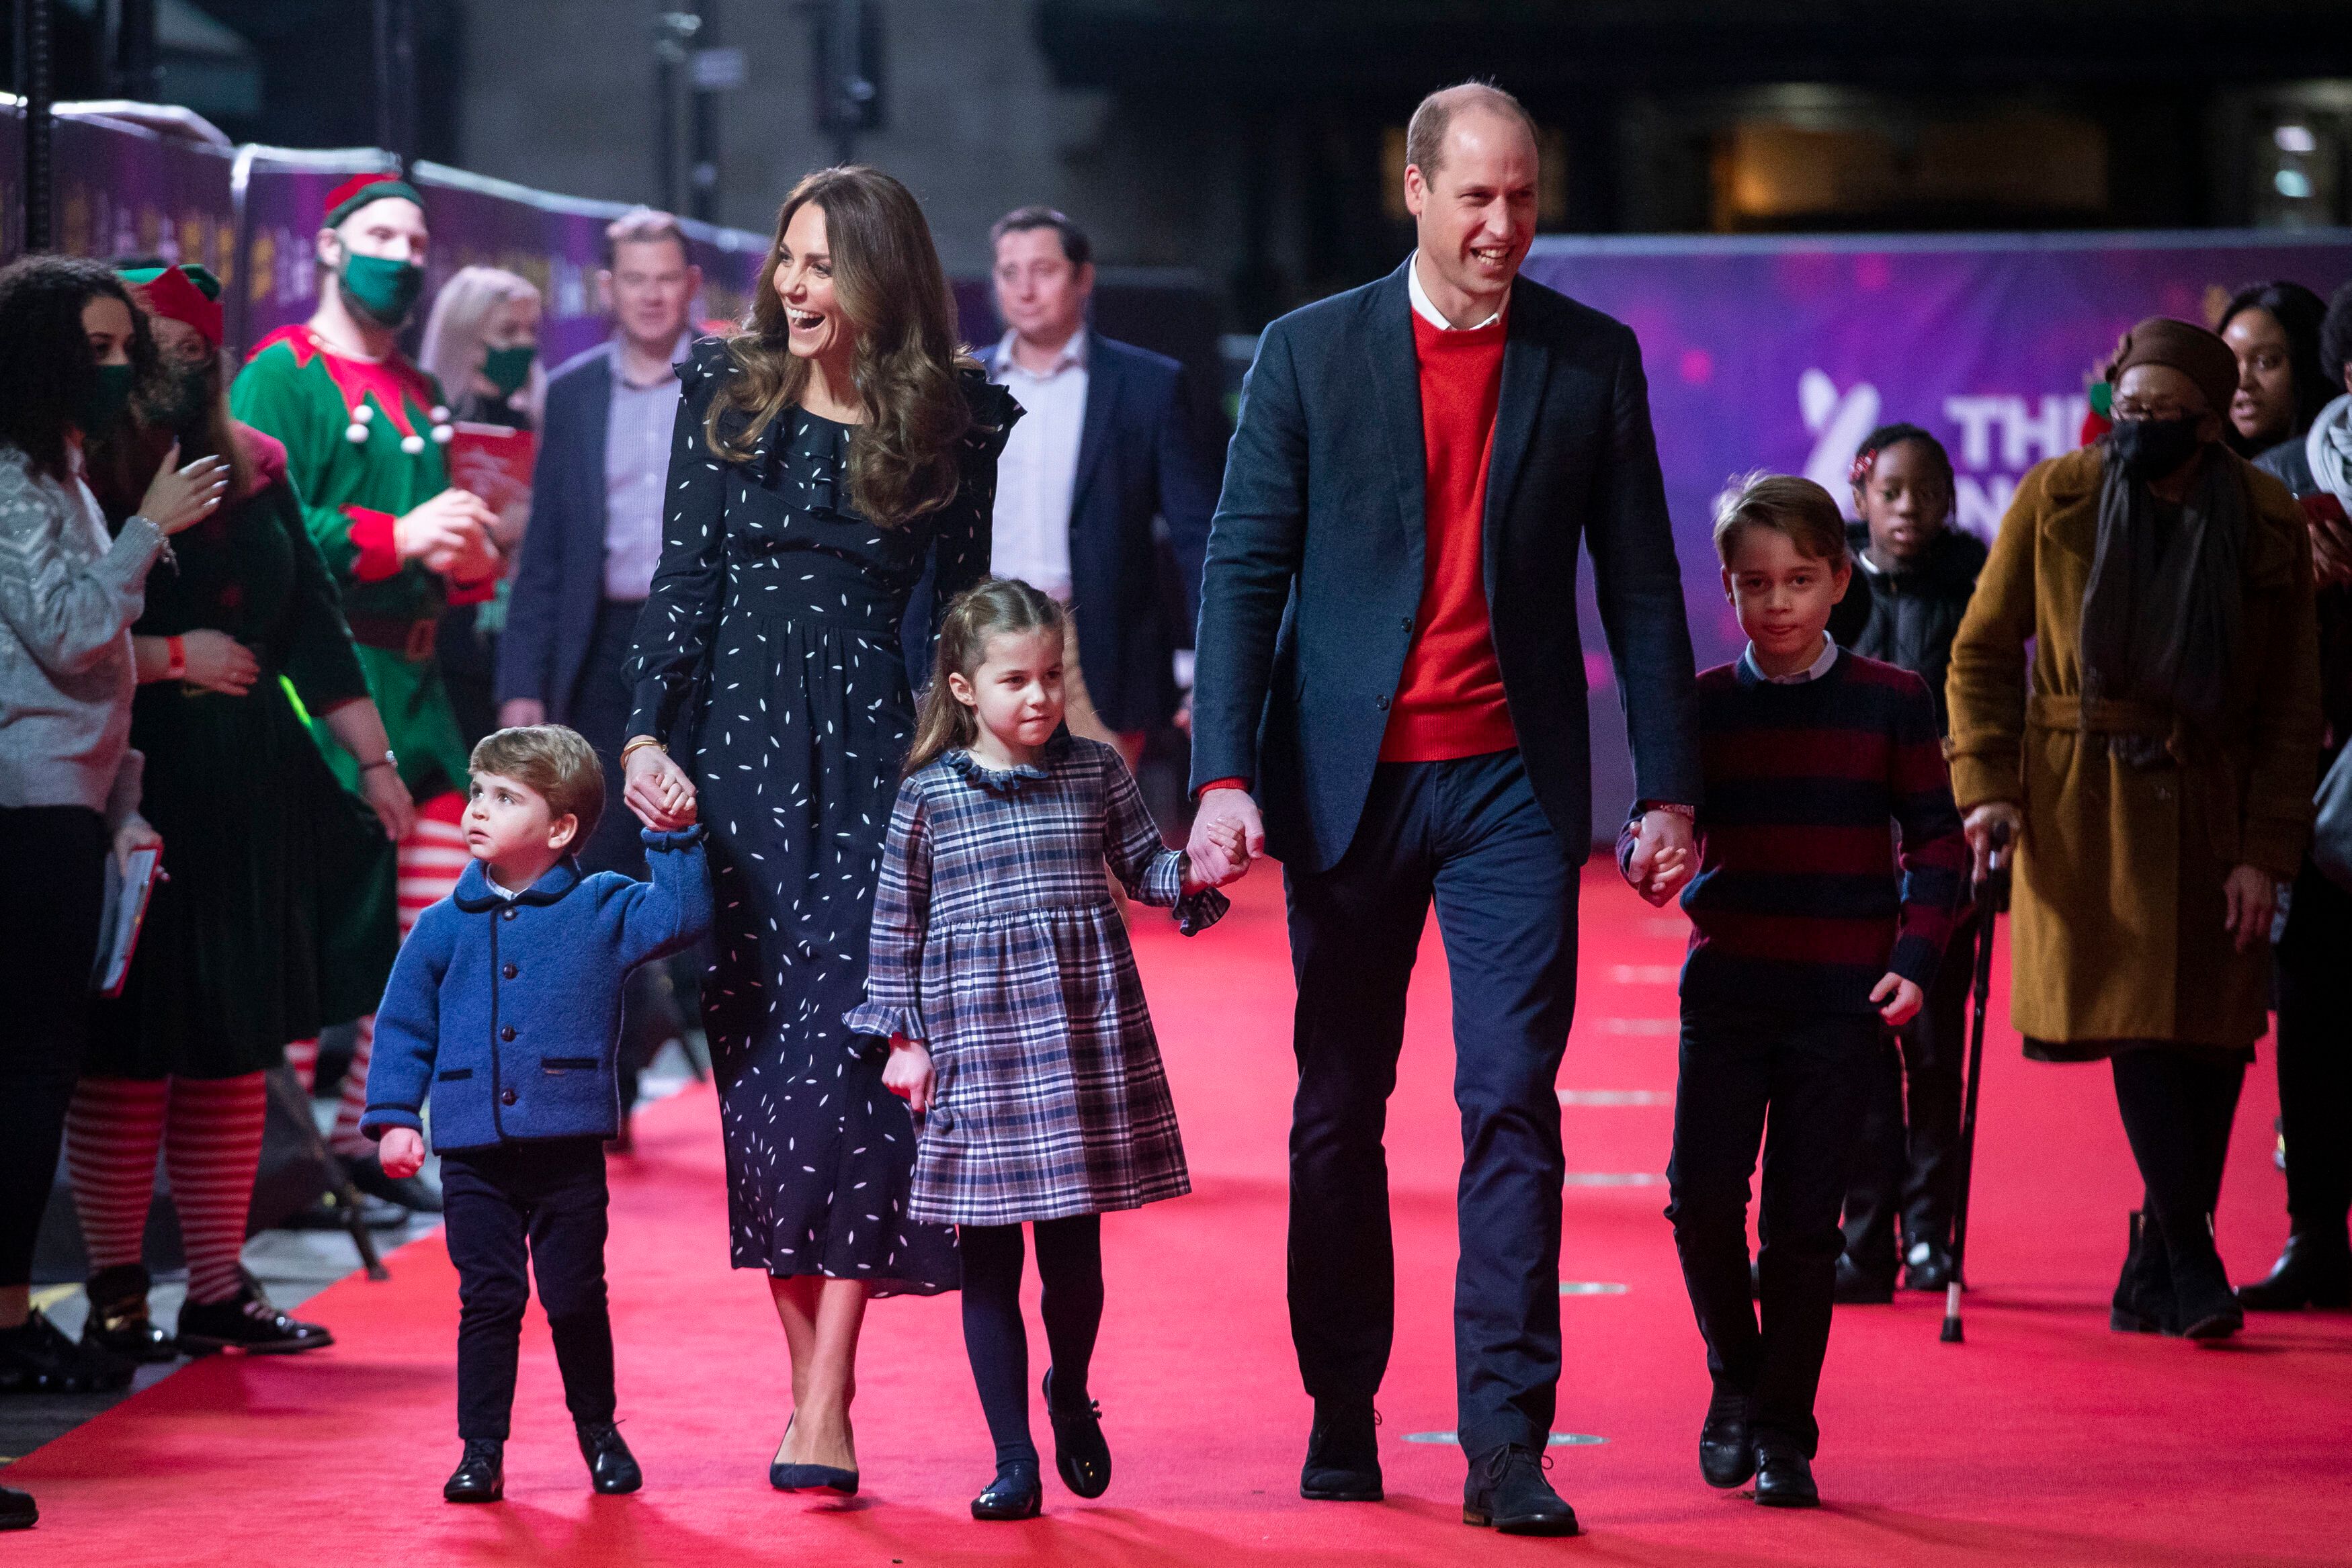 It was the first time the family of five has appeared together at a &ldquo;red carpet&rdquo; event.